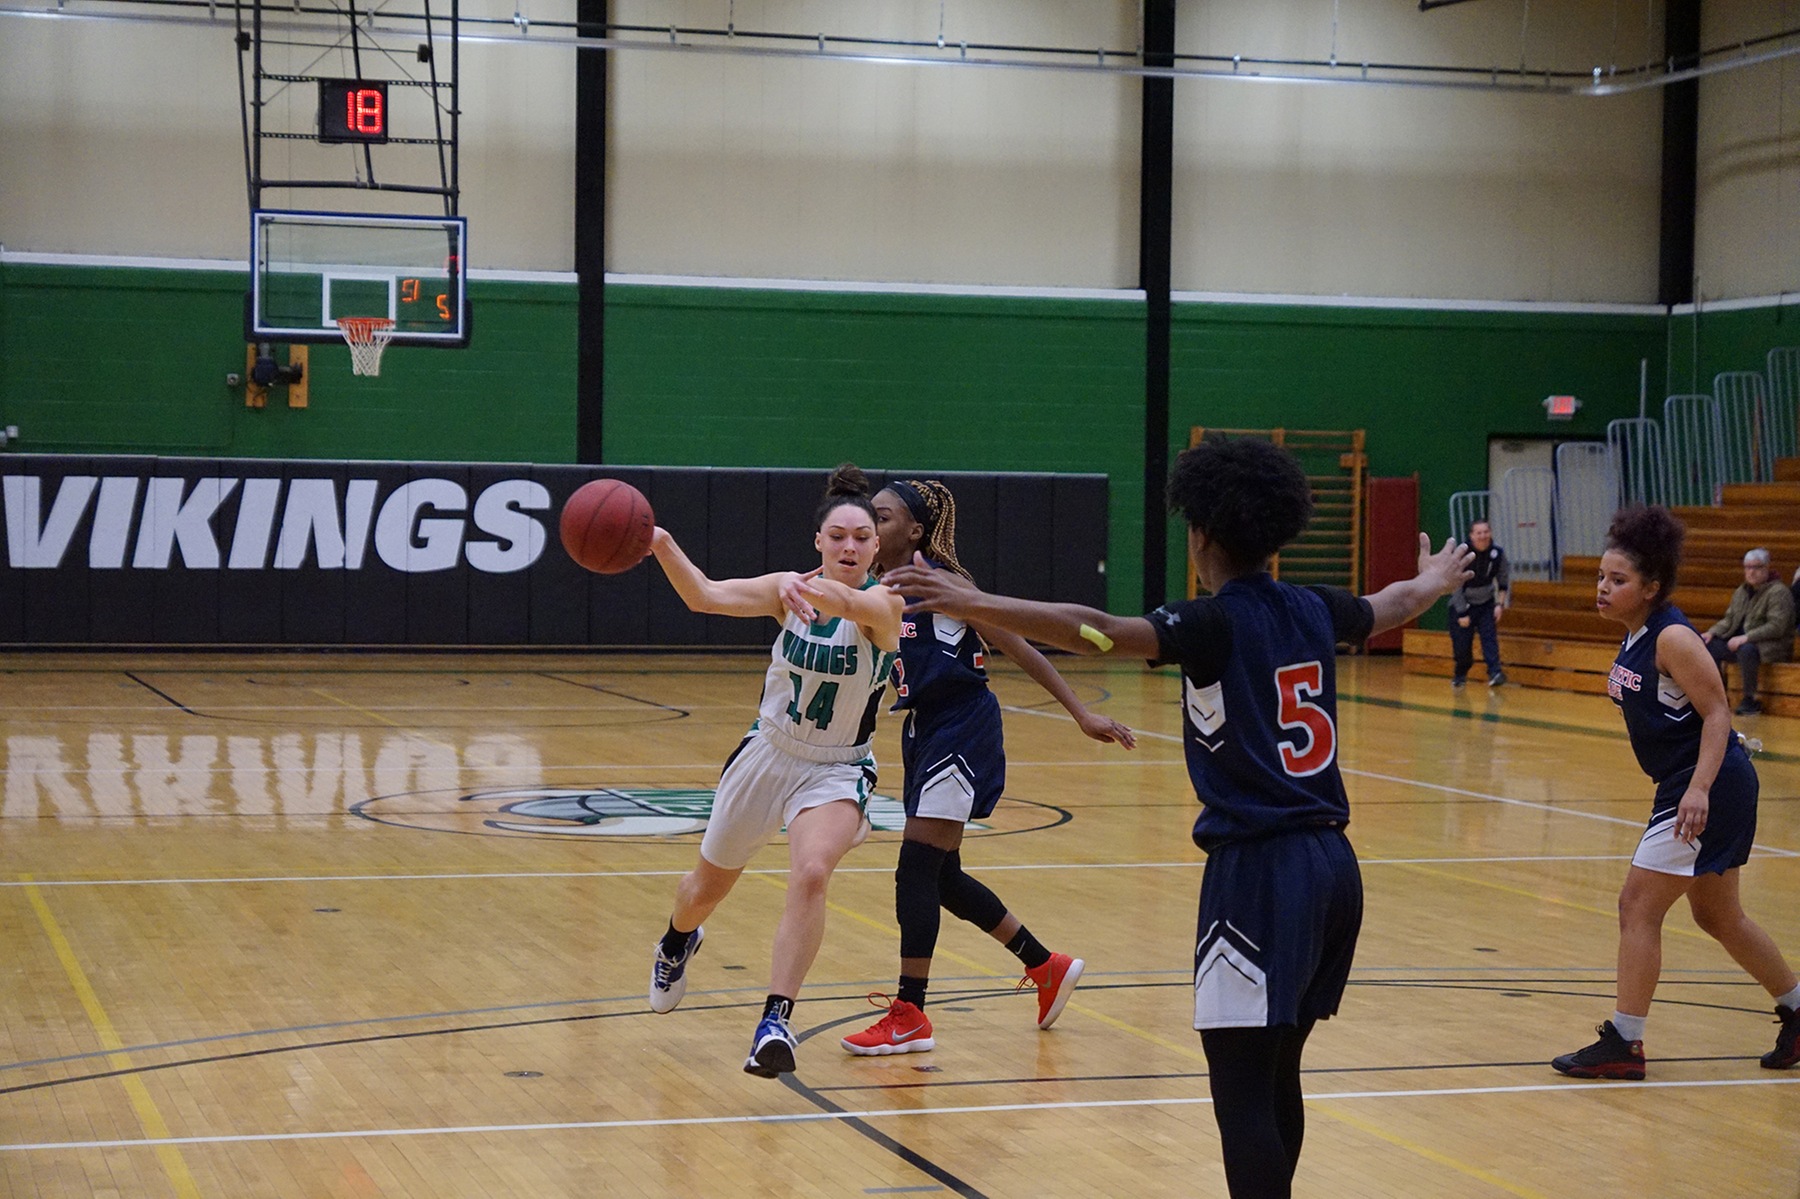 Kelly Breaks Out as Vikings Fall to Top-Ranked Brookdale CC, 86-30